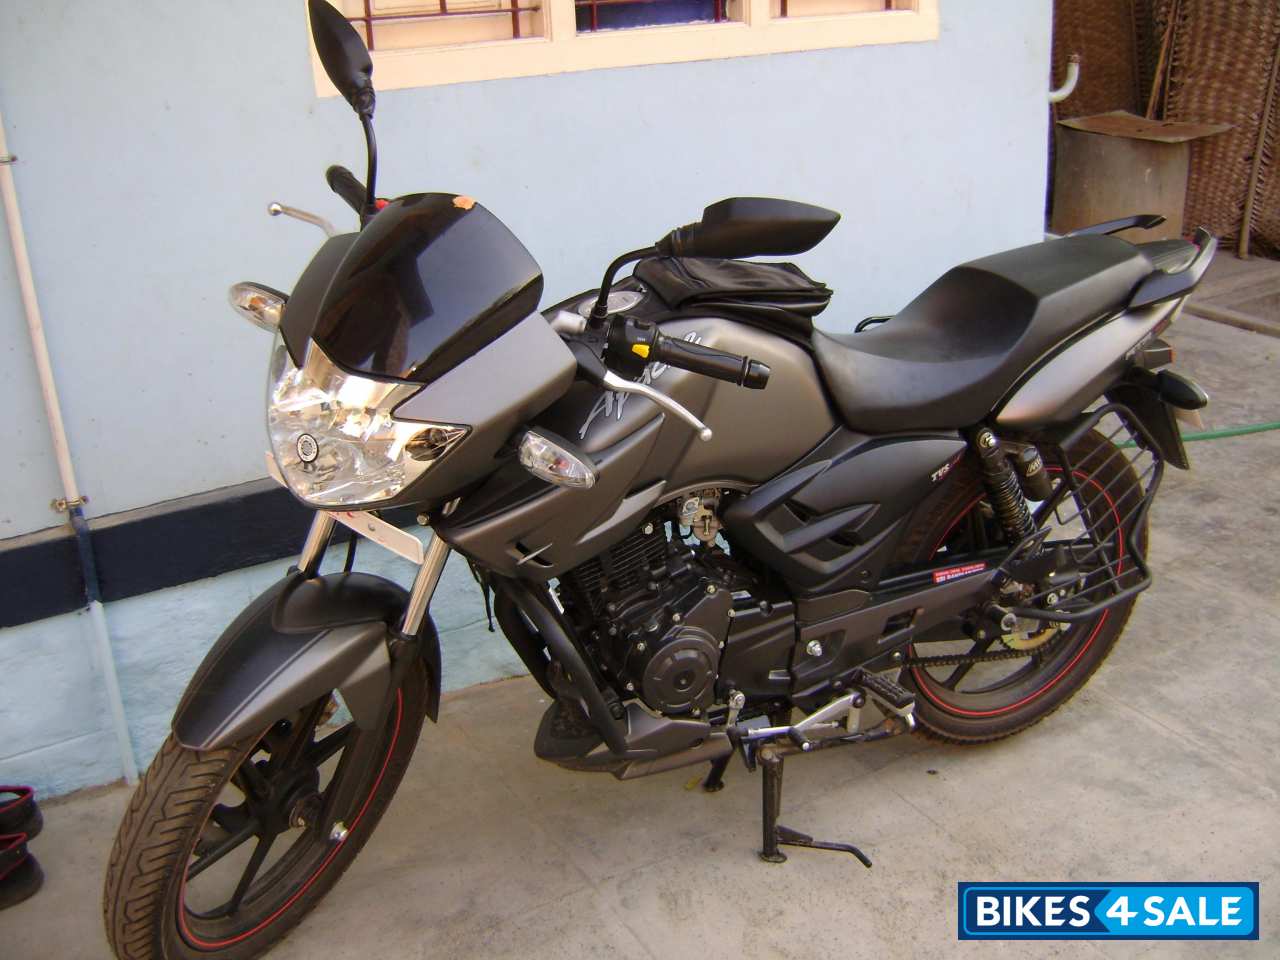 Used 08 Model Tvs Apache Rtr 160 For Sale In Bangalore Id Grey Colour Bikes4sale